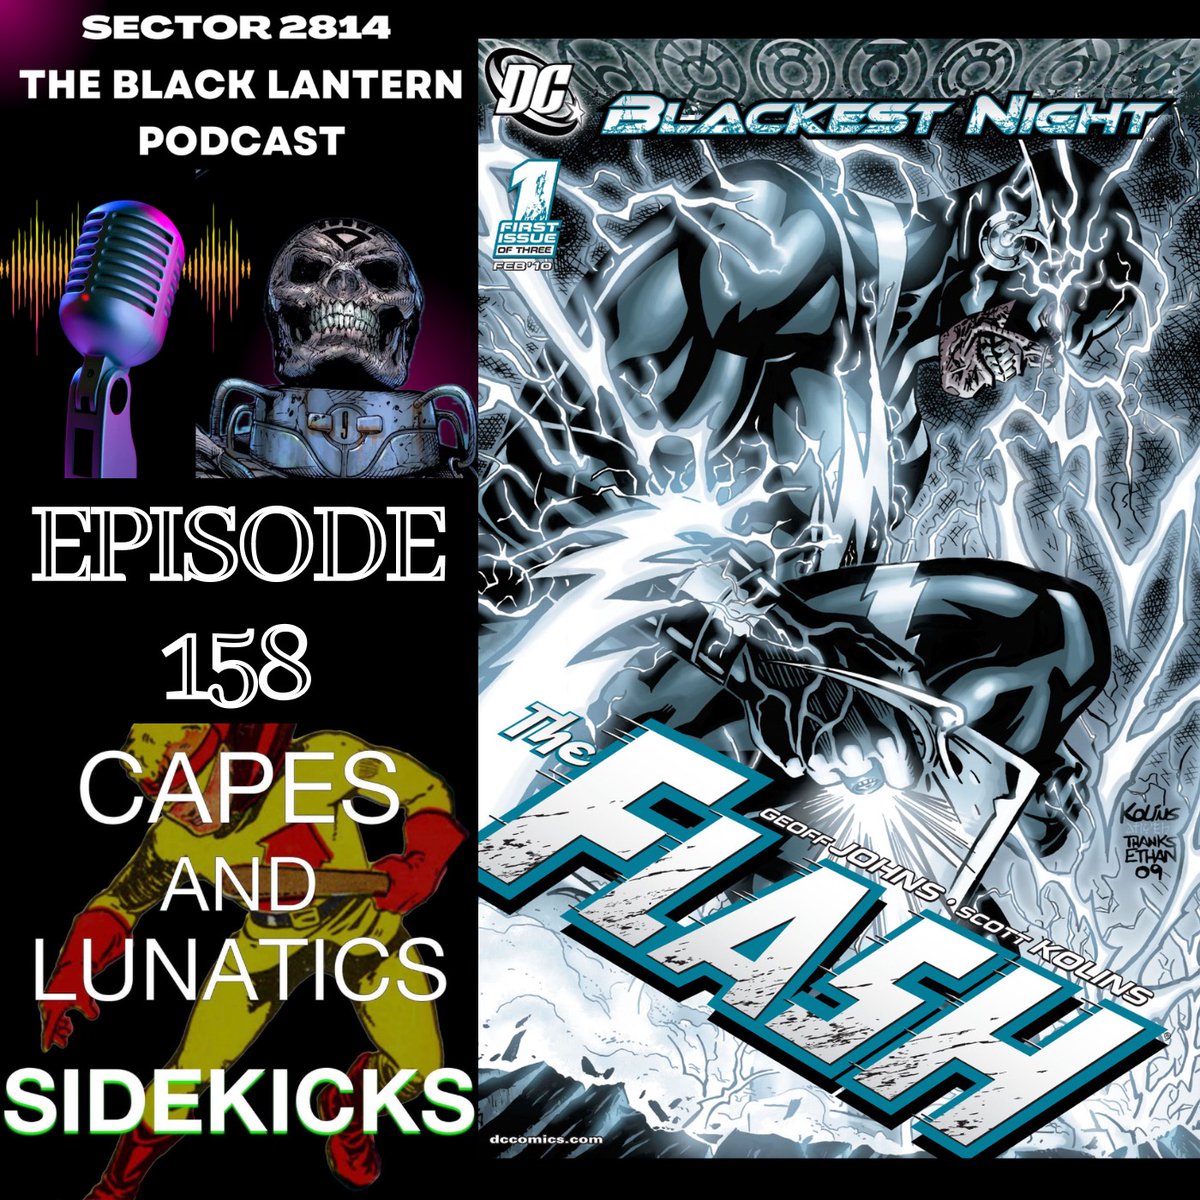 Sector 2814: The Green Lantern Podcast Episode #158 tinyurl.com/3rrajbk6 Phil and Will review of Blackest Night: #TheFlash #1, Blackest Night: #WonderWoman #1, Blackest Night: JSA #1, Green Lantern Corps #42, #GreenLantern #48.